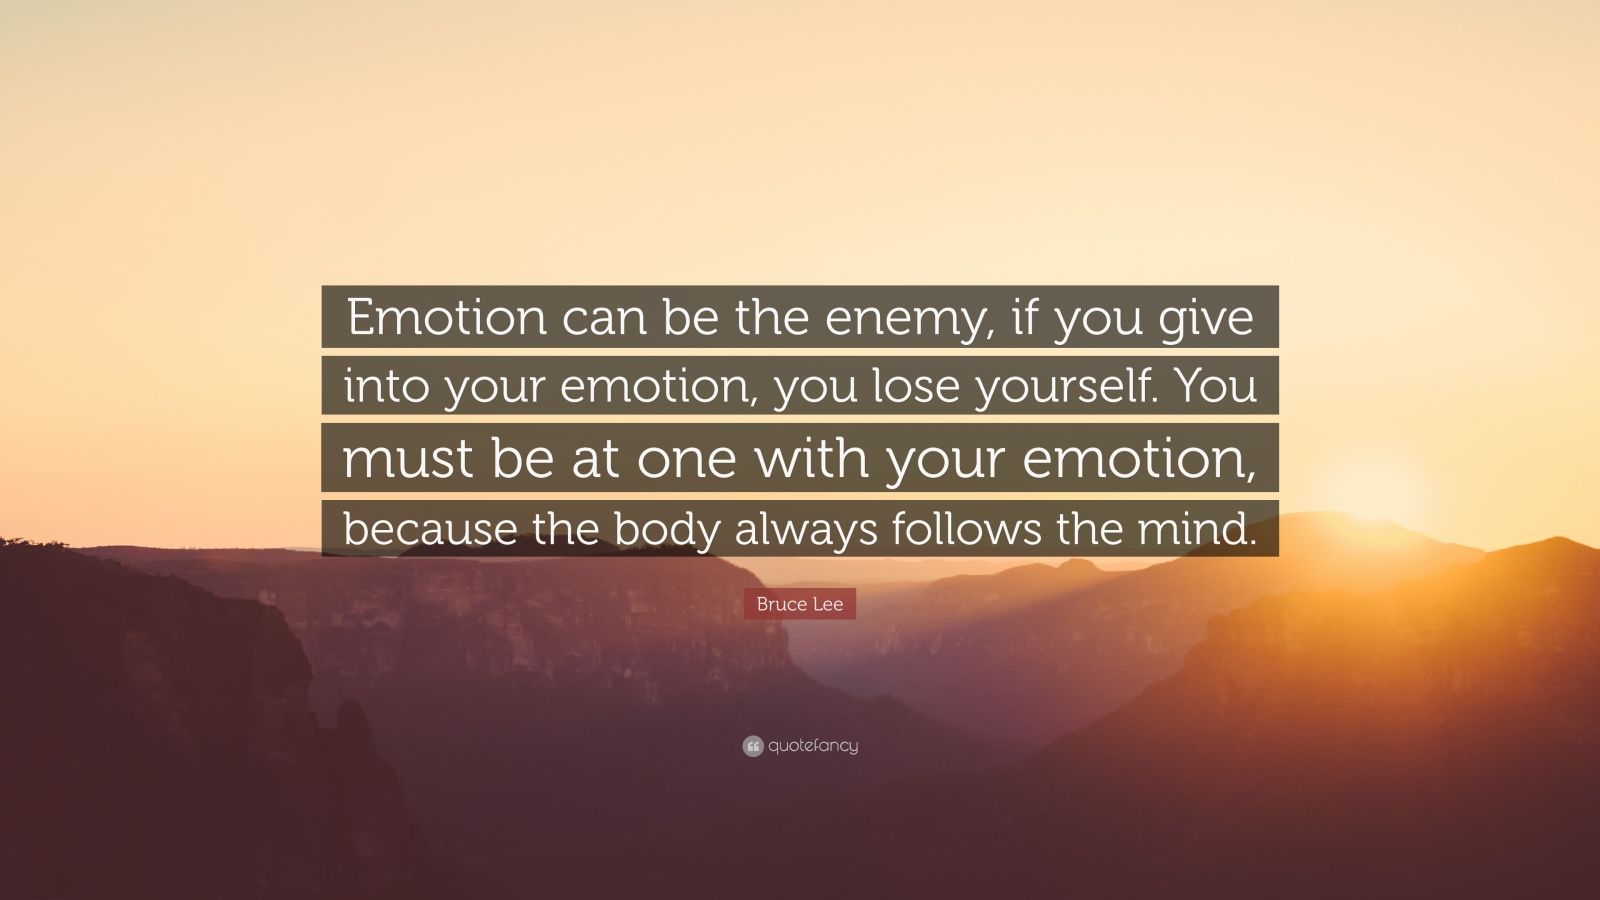 Bruce Lee Quote “Emotion can be the enemy, if you give